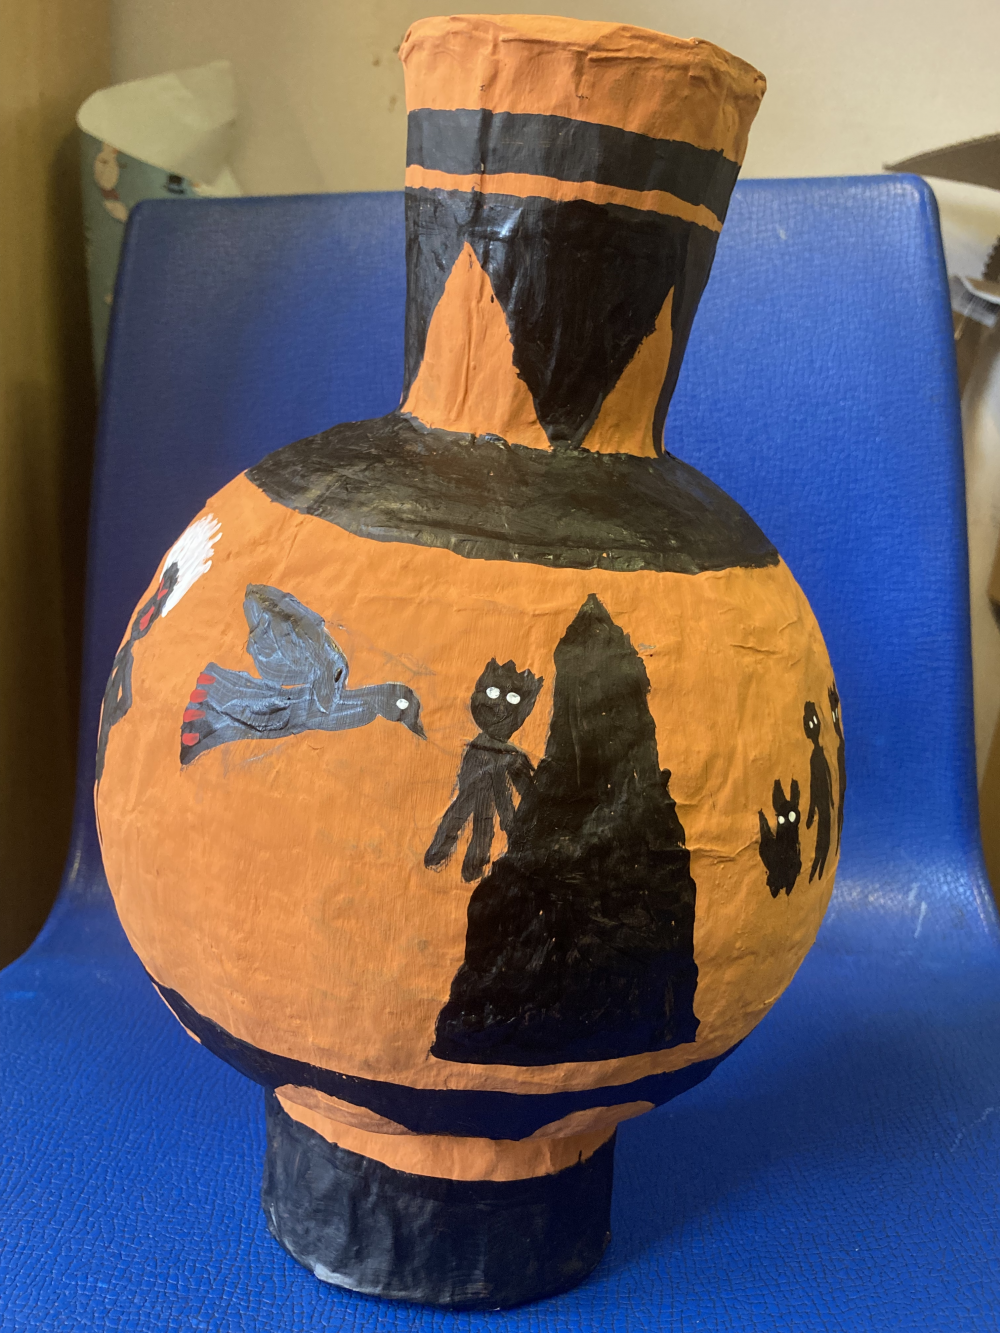 Papiermaché model of a Greek vase in a gorgeous orange and black. Black figures on the vase represent Prometheus chained to Mount Caucasus watching in horror as the Eagle sent by Zeus arrives to peck at his liver.